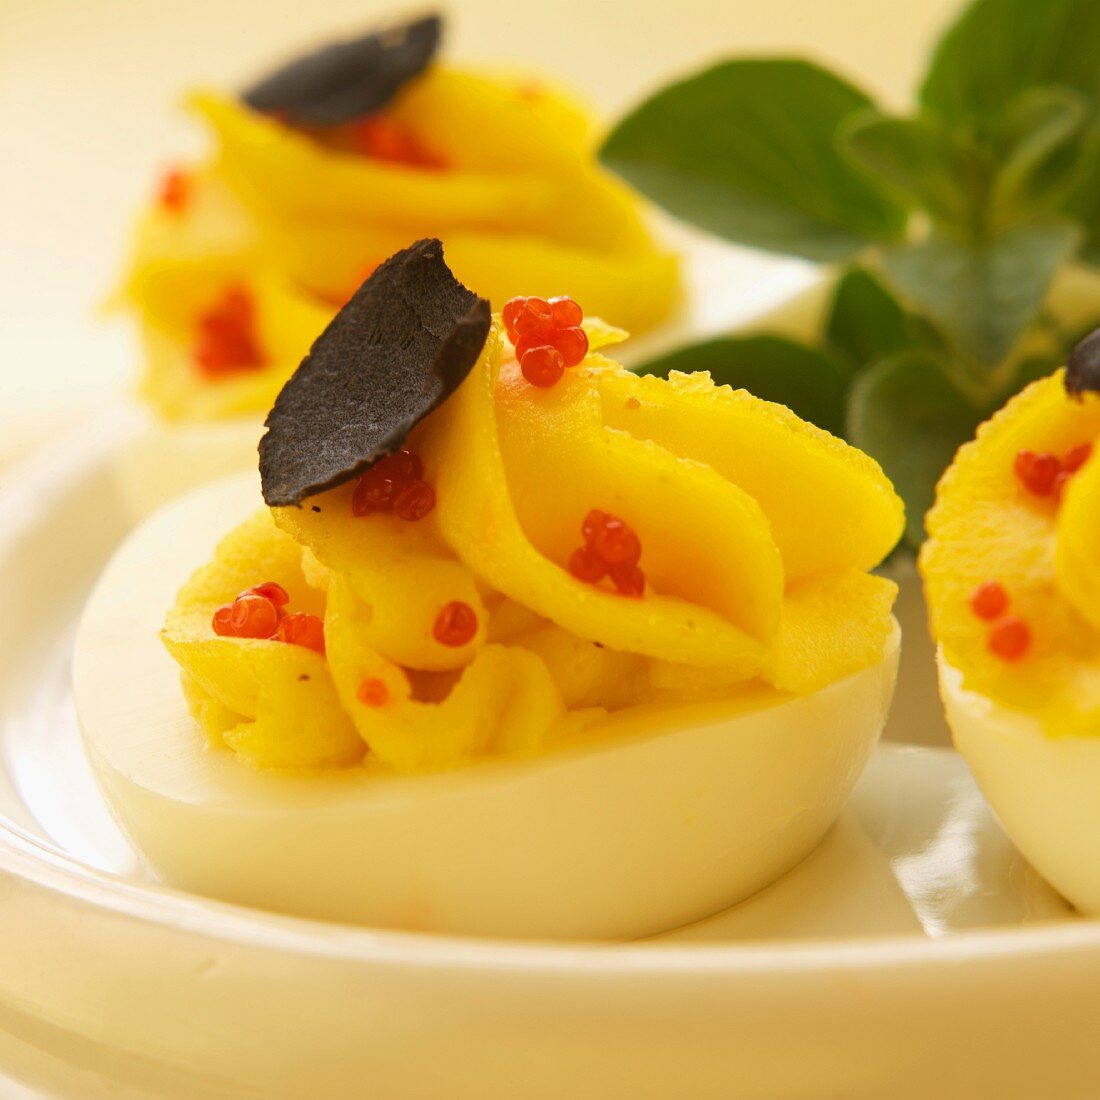 Deviled Eggs with Red Caviar and Truffle Mushroom Slices